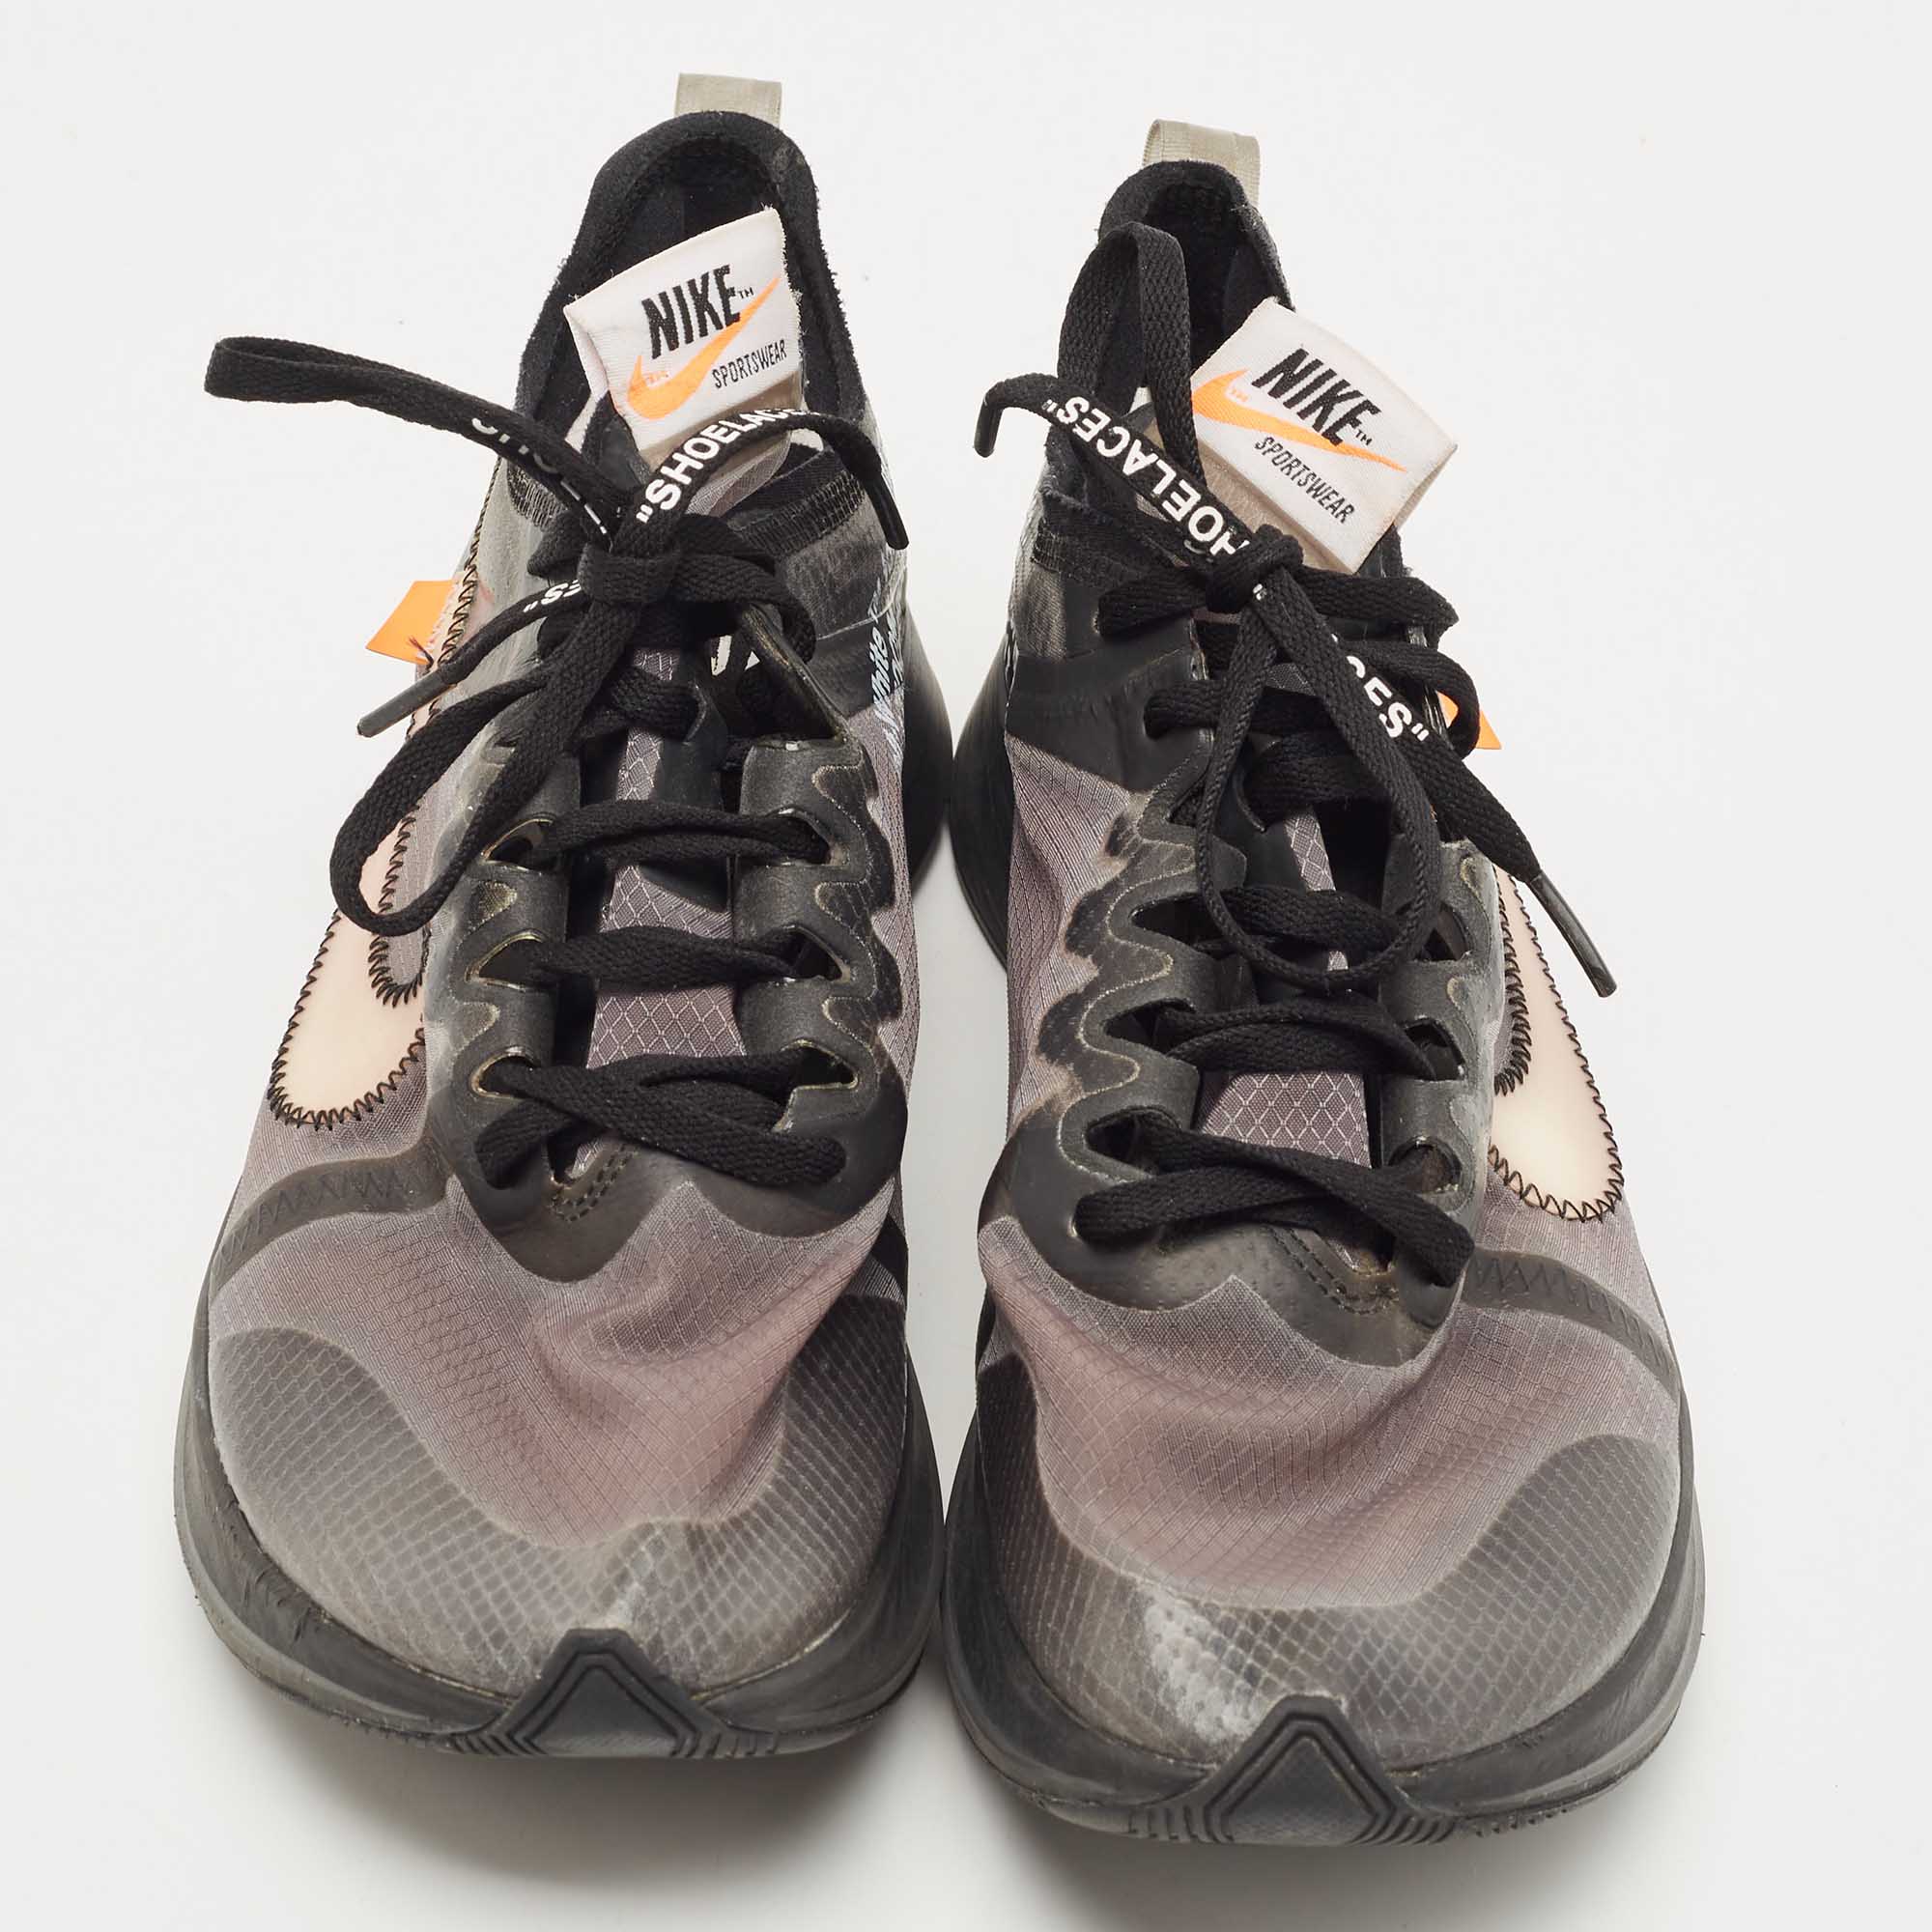 Off-White X Nike Grey/Black Nylon Lace Up Sneakers Size 41